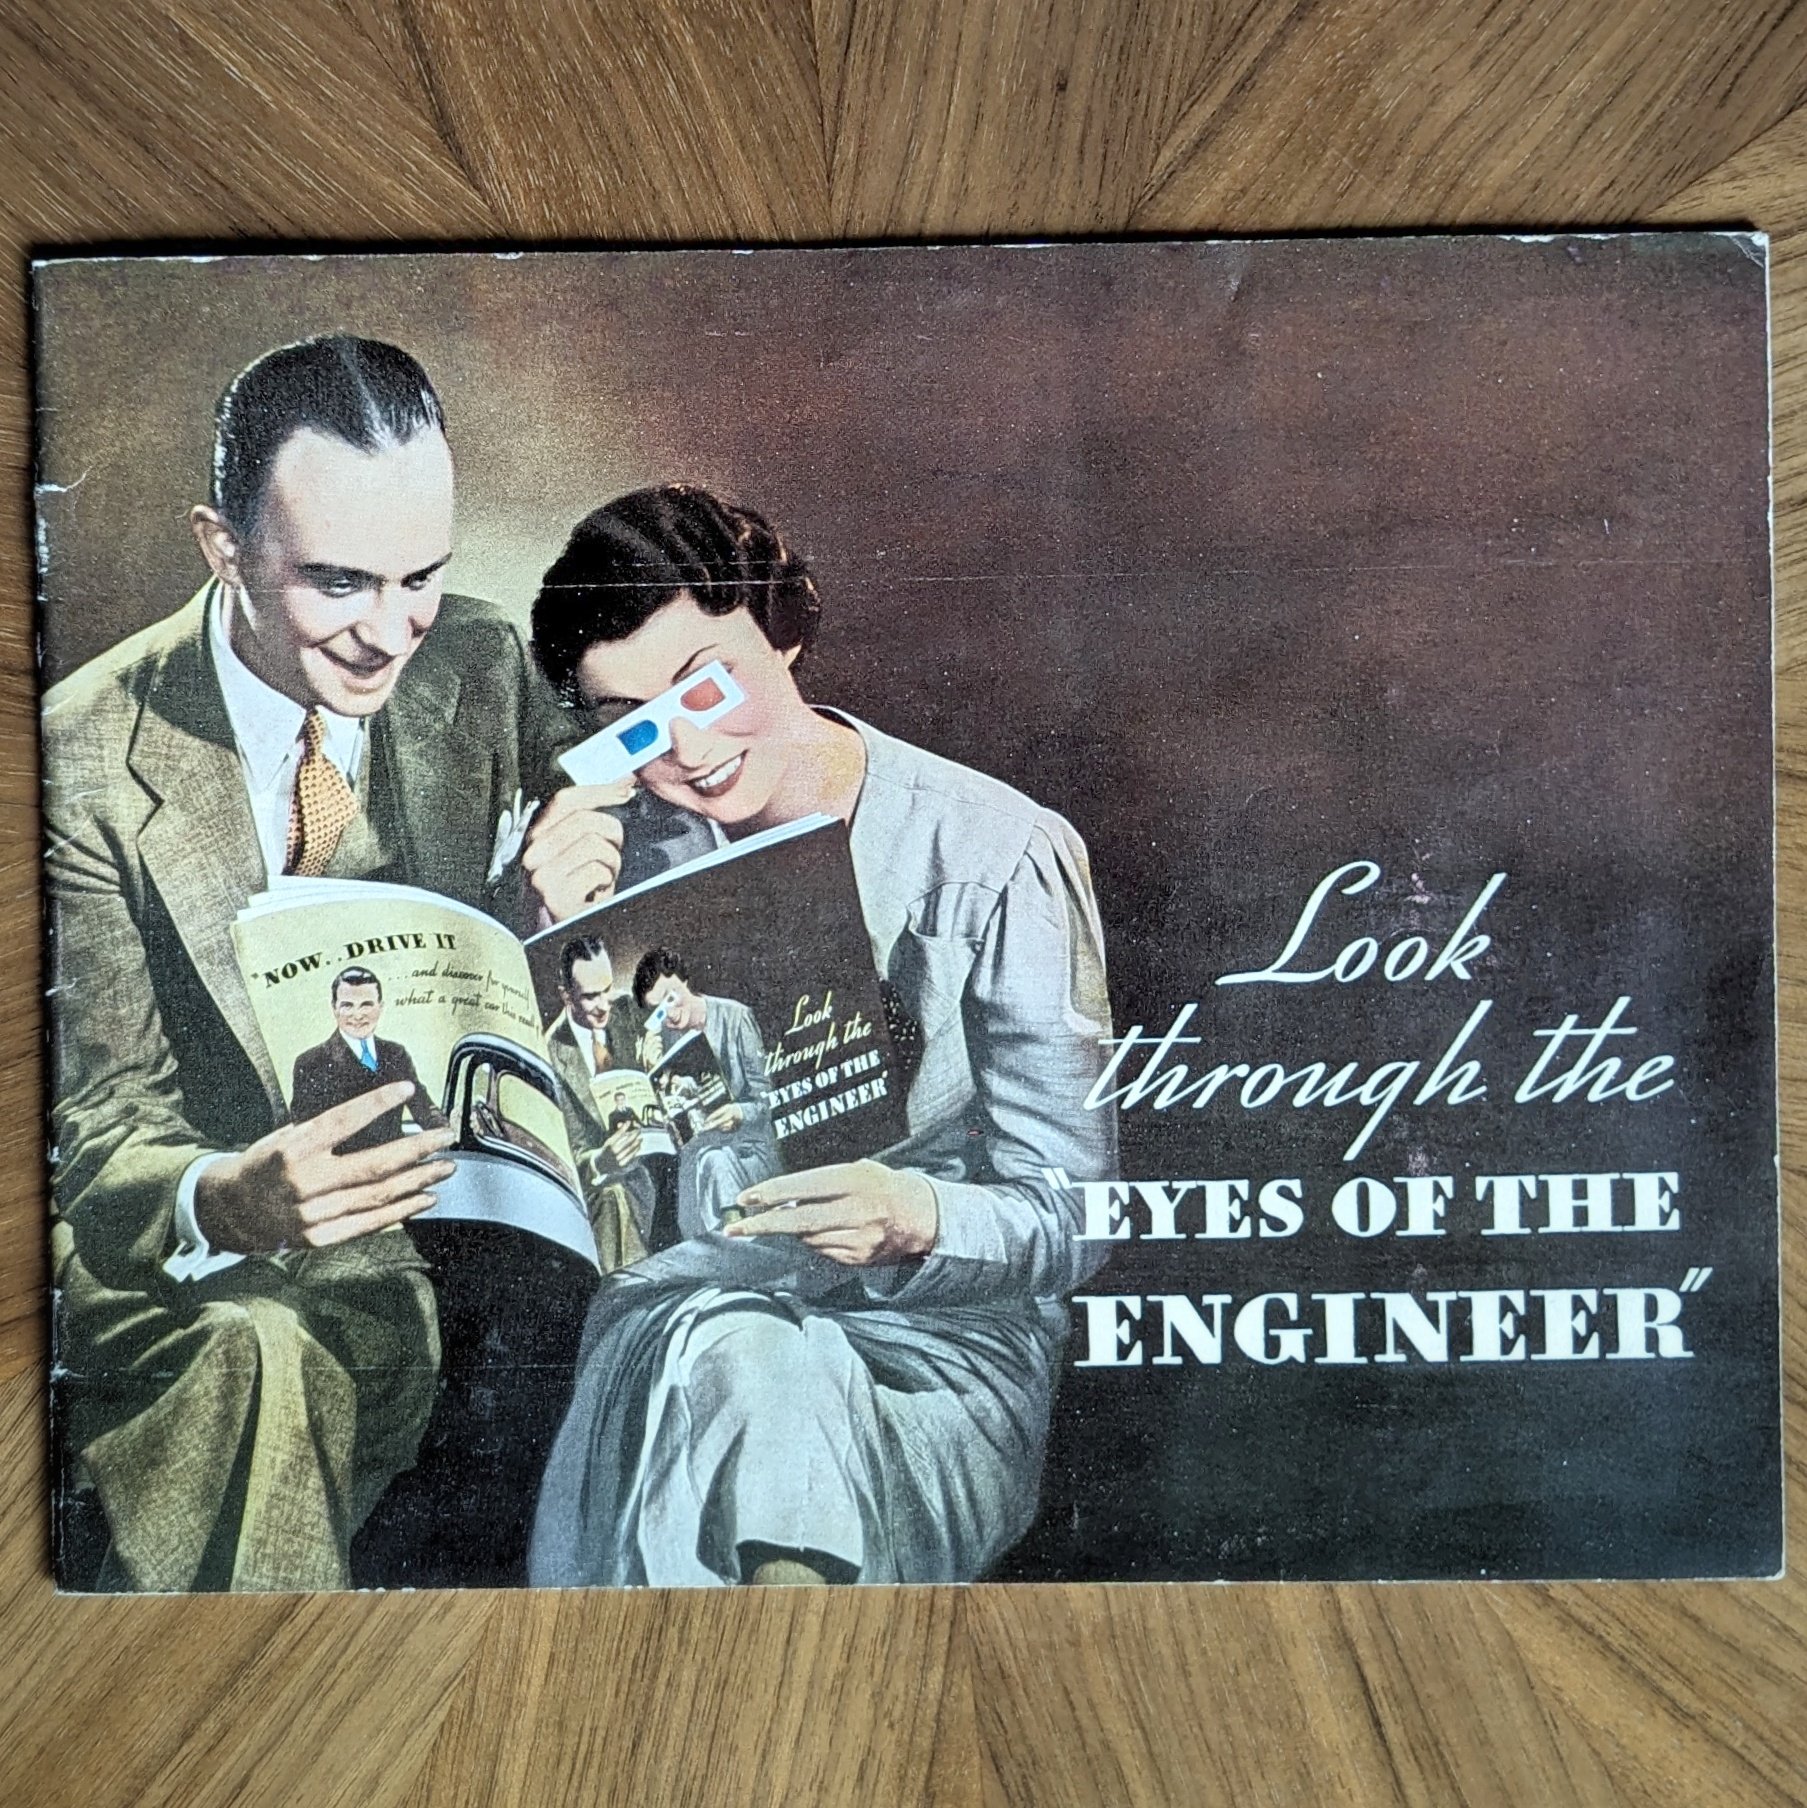 1933-ford-anaglyph-promo-book.jpeg